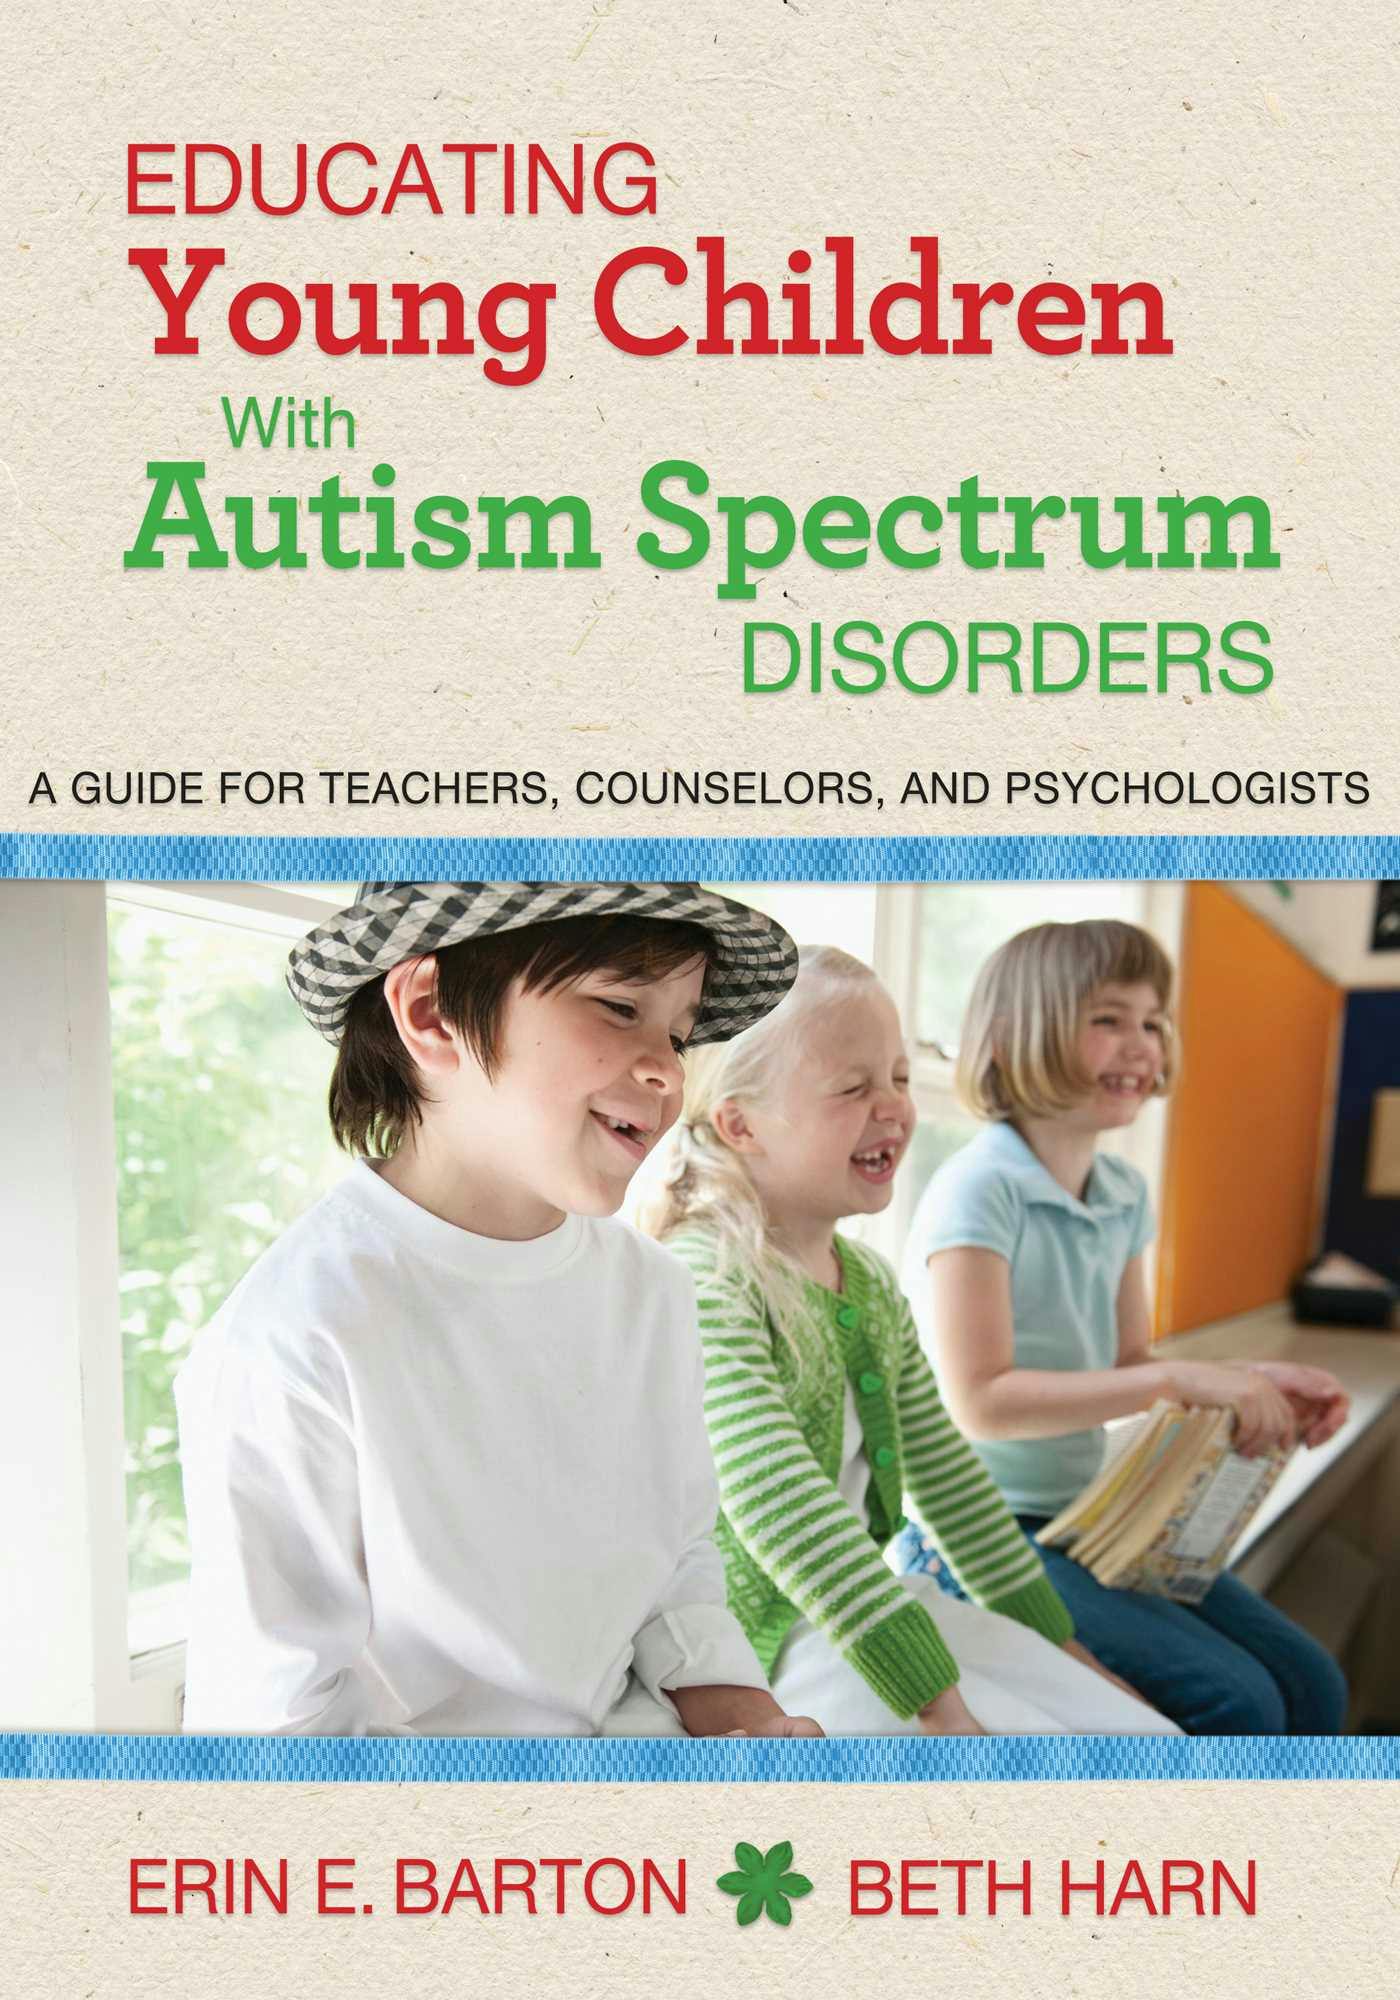 Educating Young Children with Autism Spectrum Disorders: A Guide for Teachers, Counselors, and Psychologists - Erin E. Barton, Beth Harn